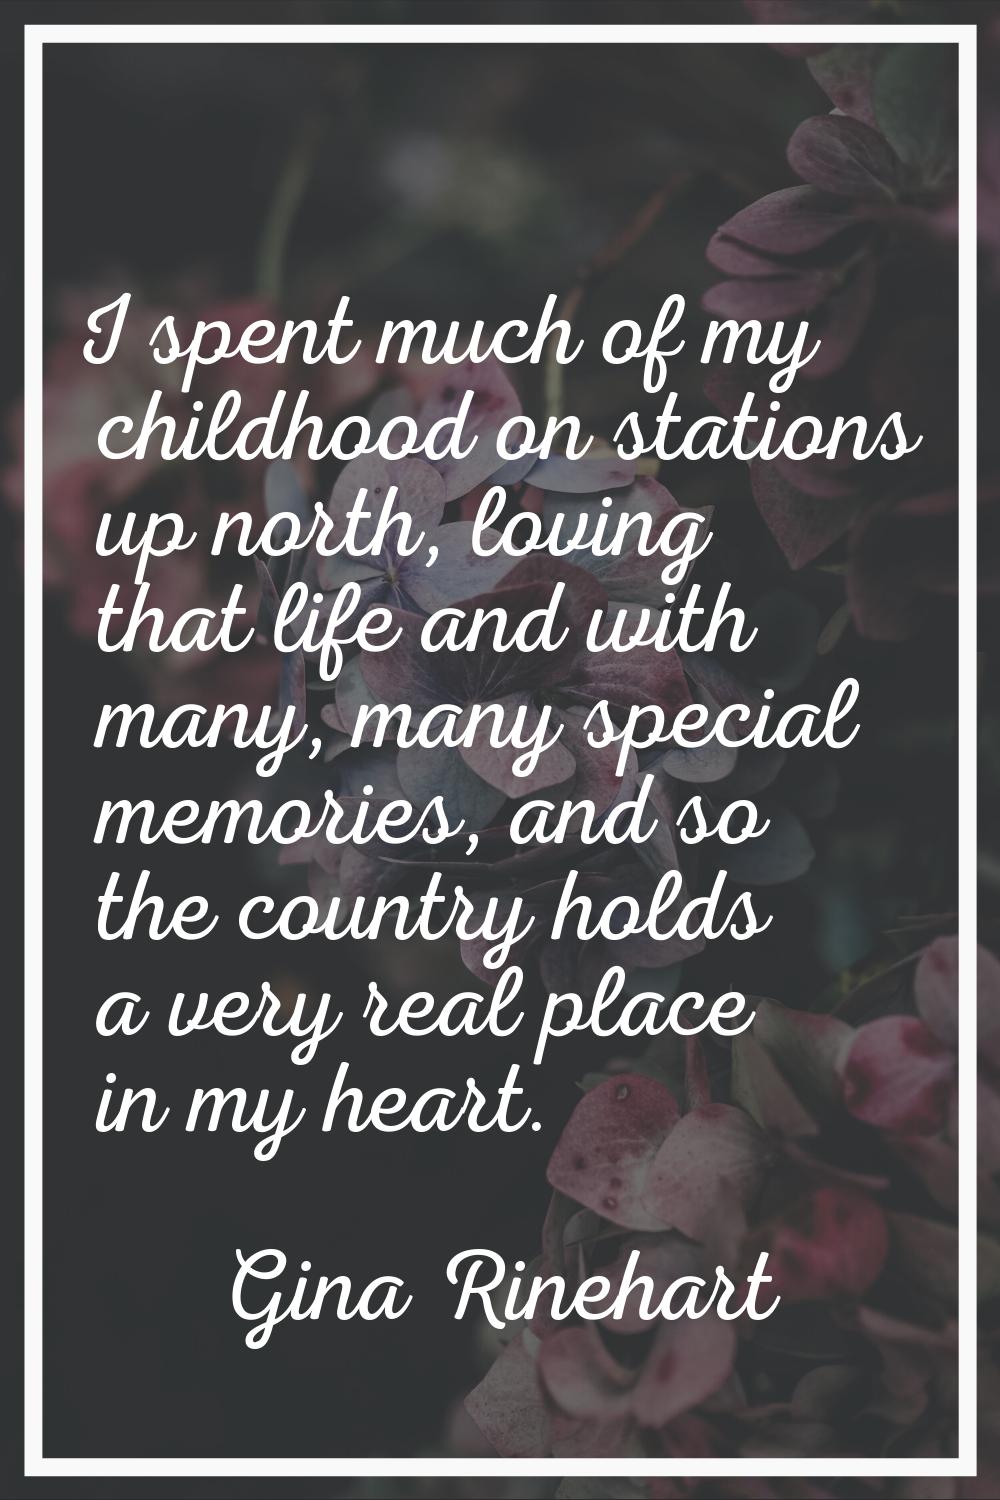 I spent much of my childhood on stations up north, loving that life and with many, many special mem